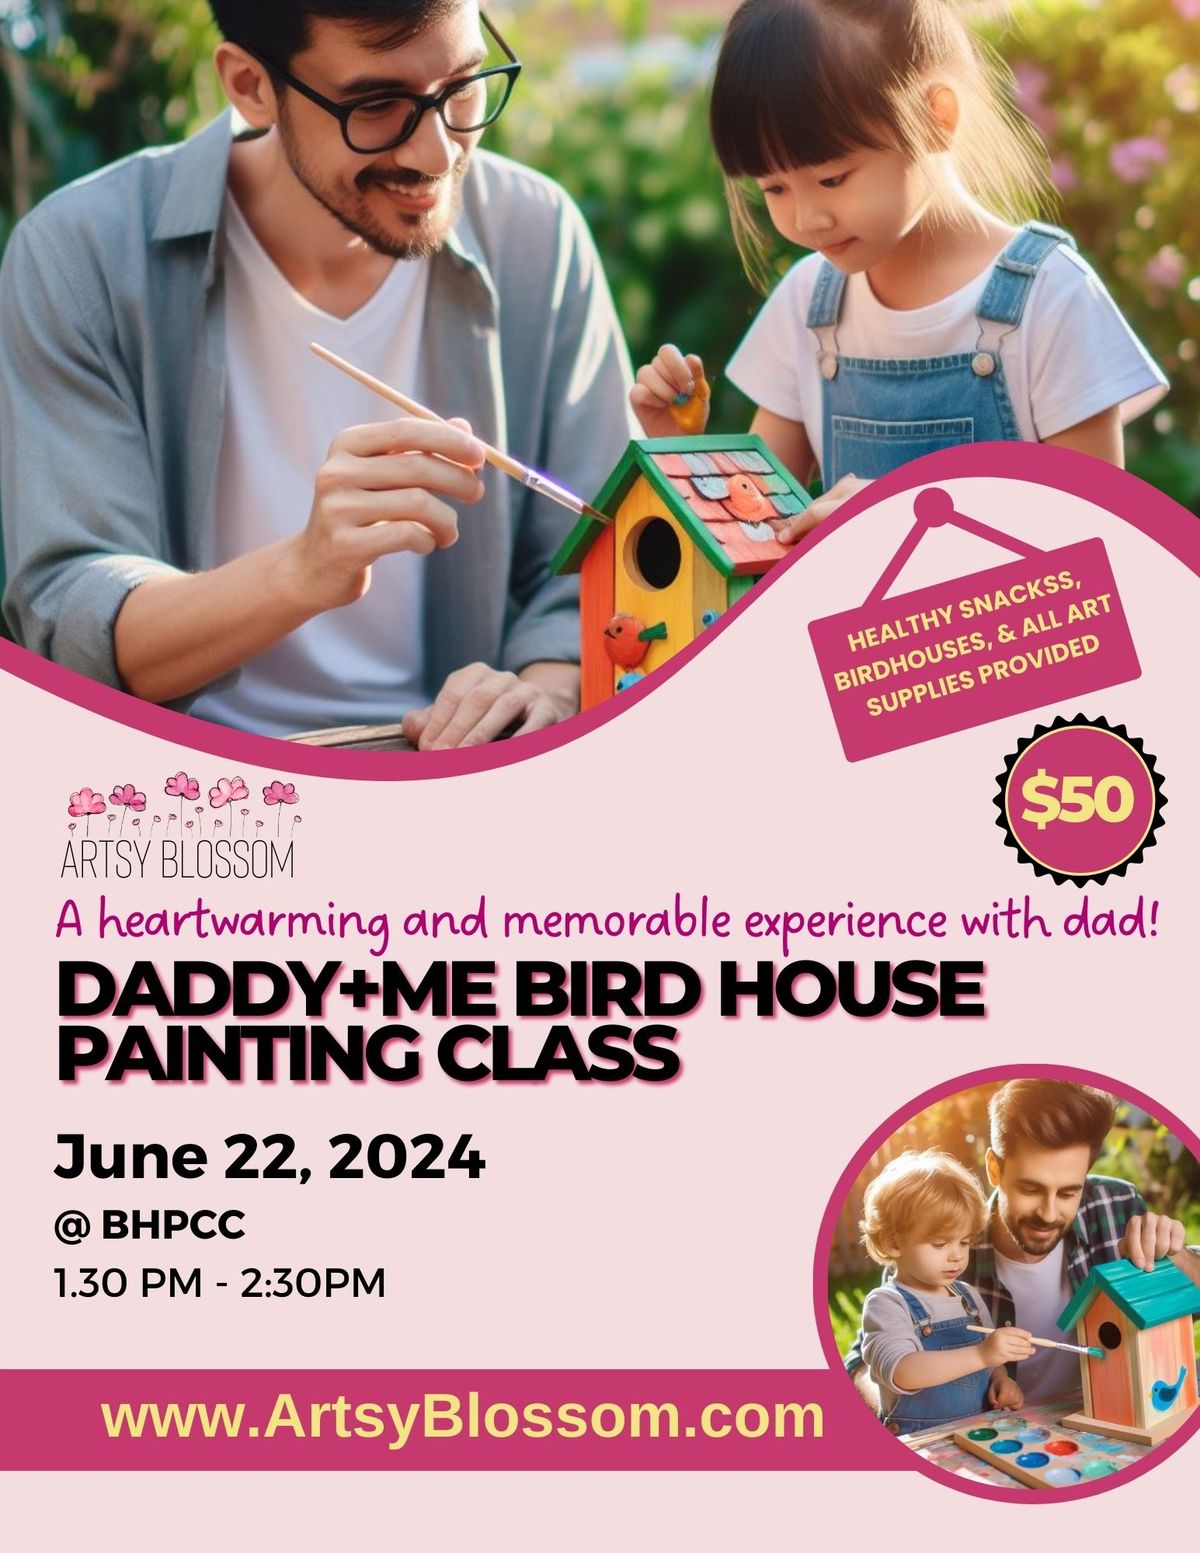 Daddy+Me Bird House Painting Class